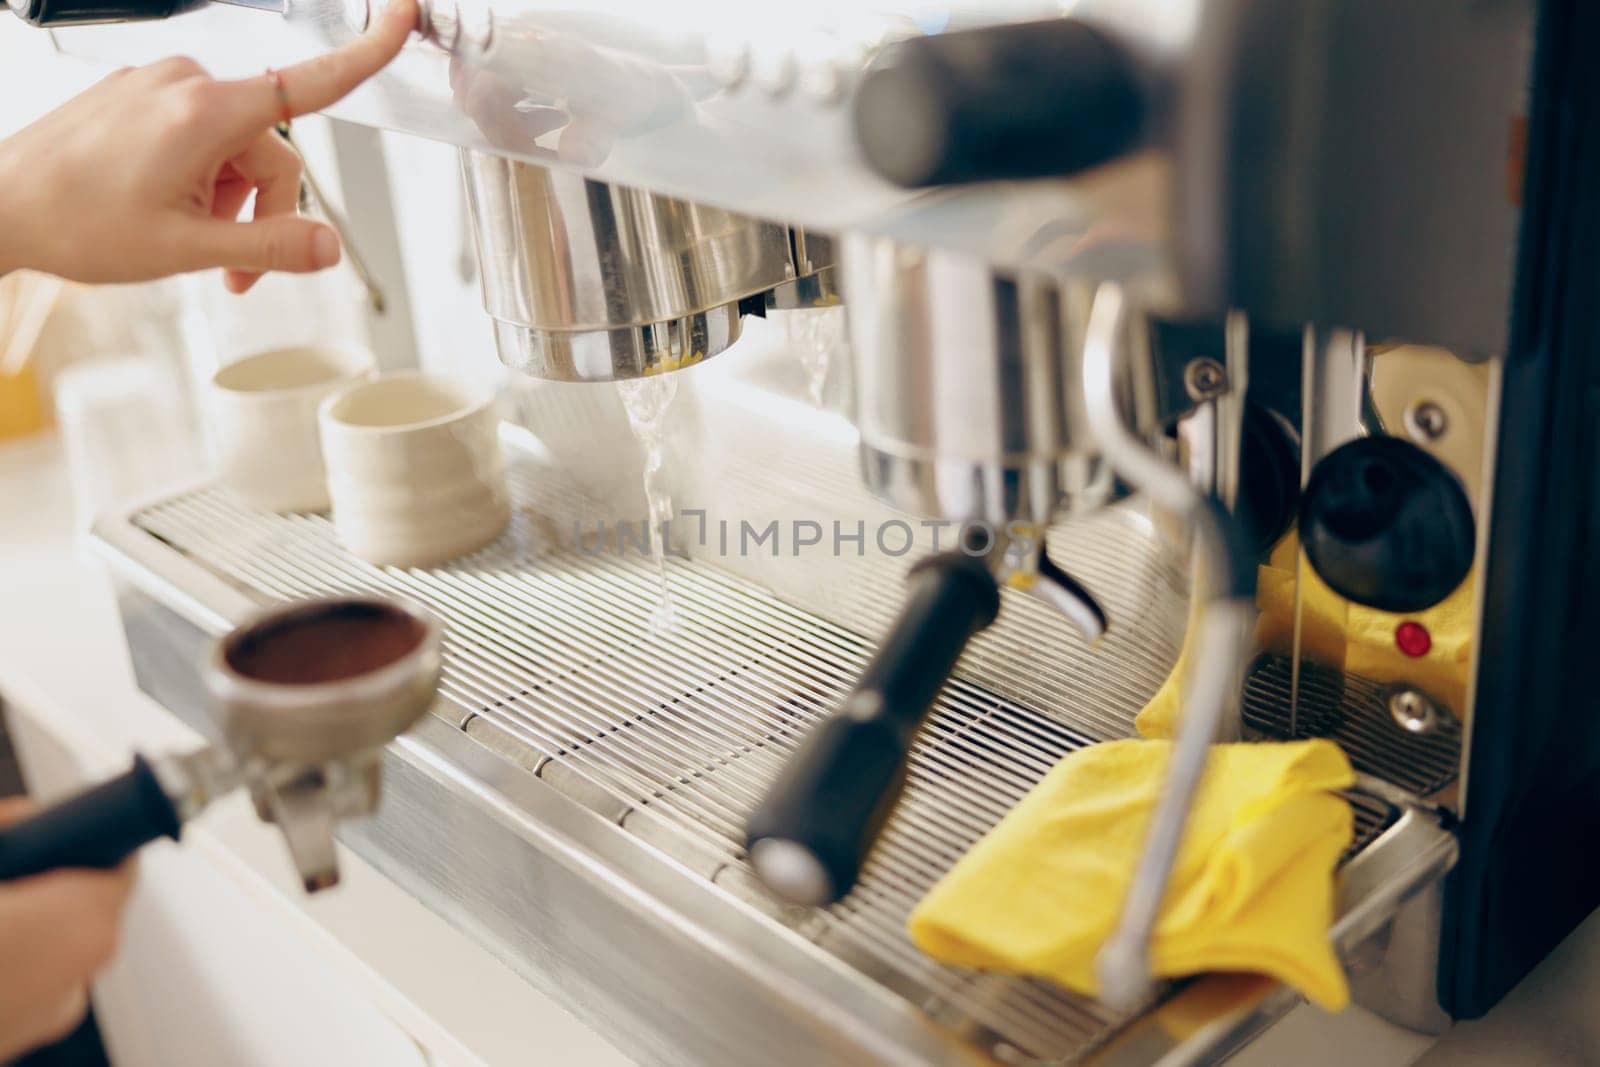 Close up of female barista making coffee in a coffee machine while working in cafe